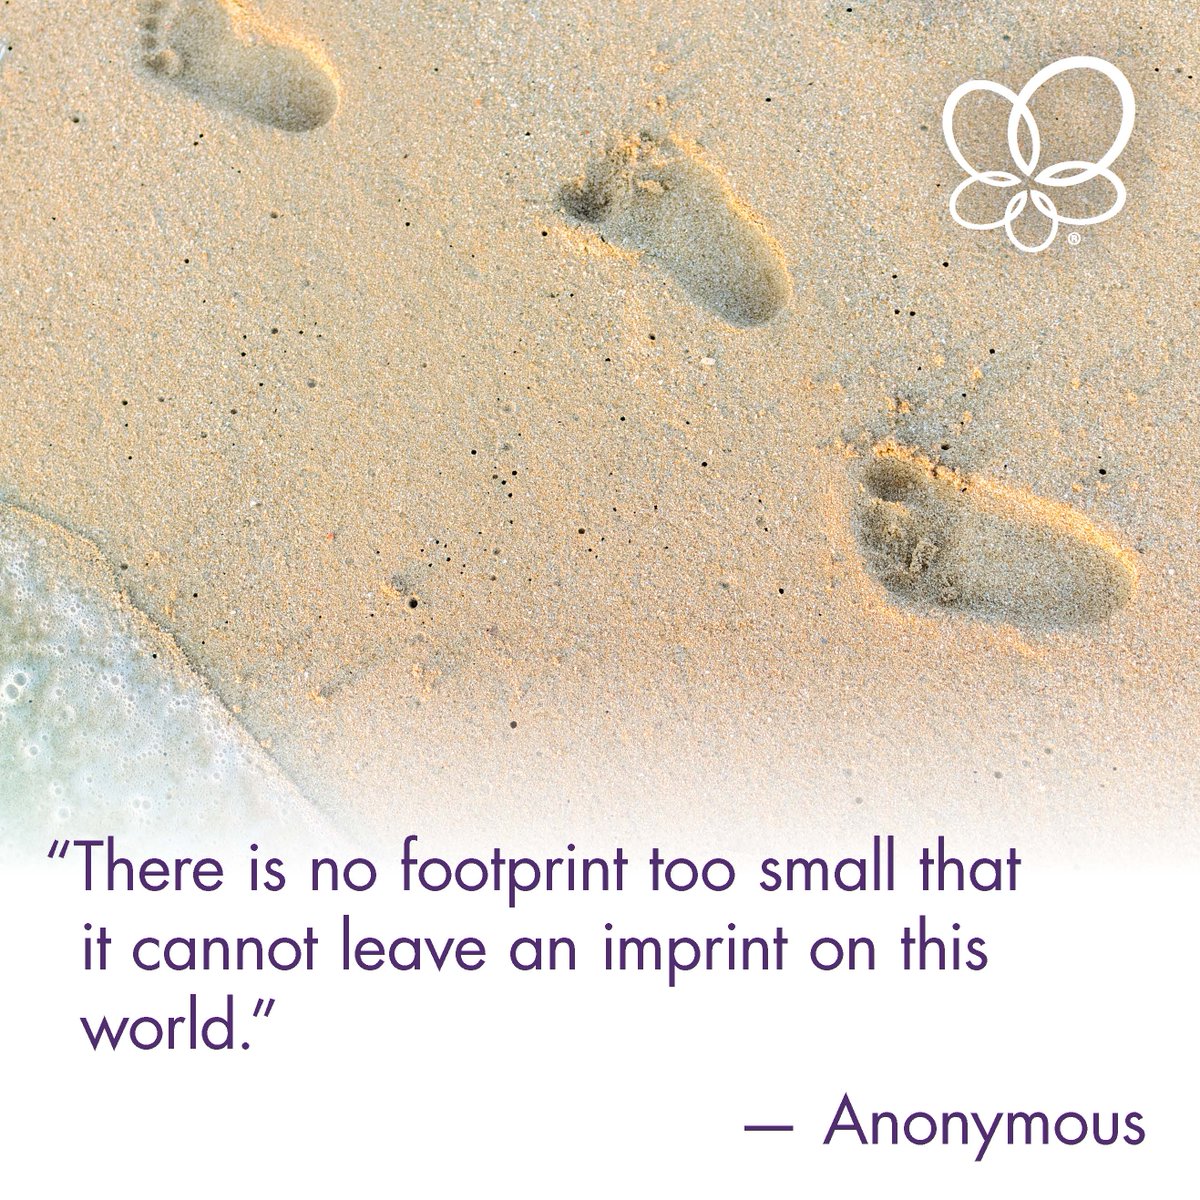 Embrace the week with the reminder that every small step matters. Even the smallest feet can create lasting imprints of positivity and change.